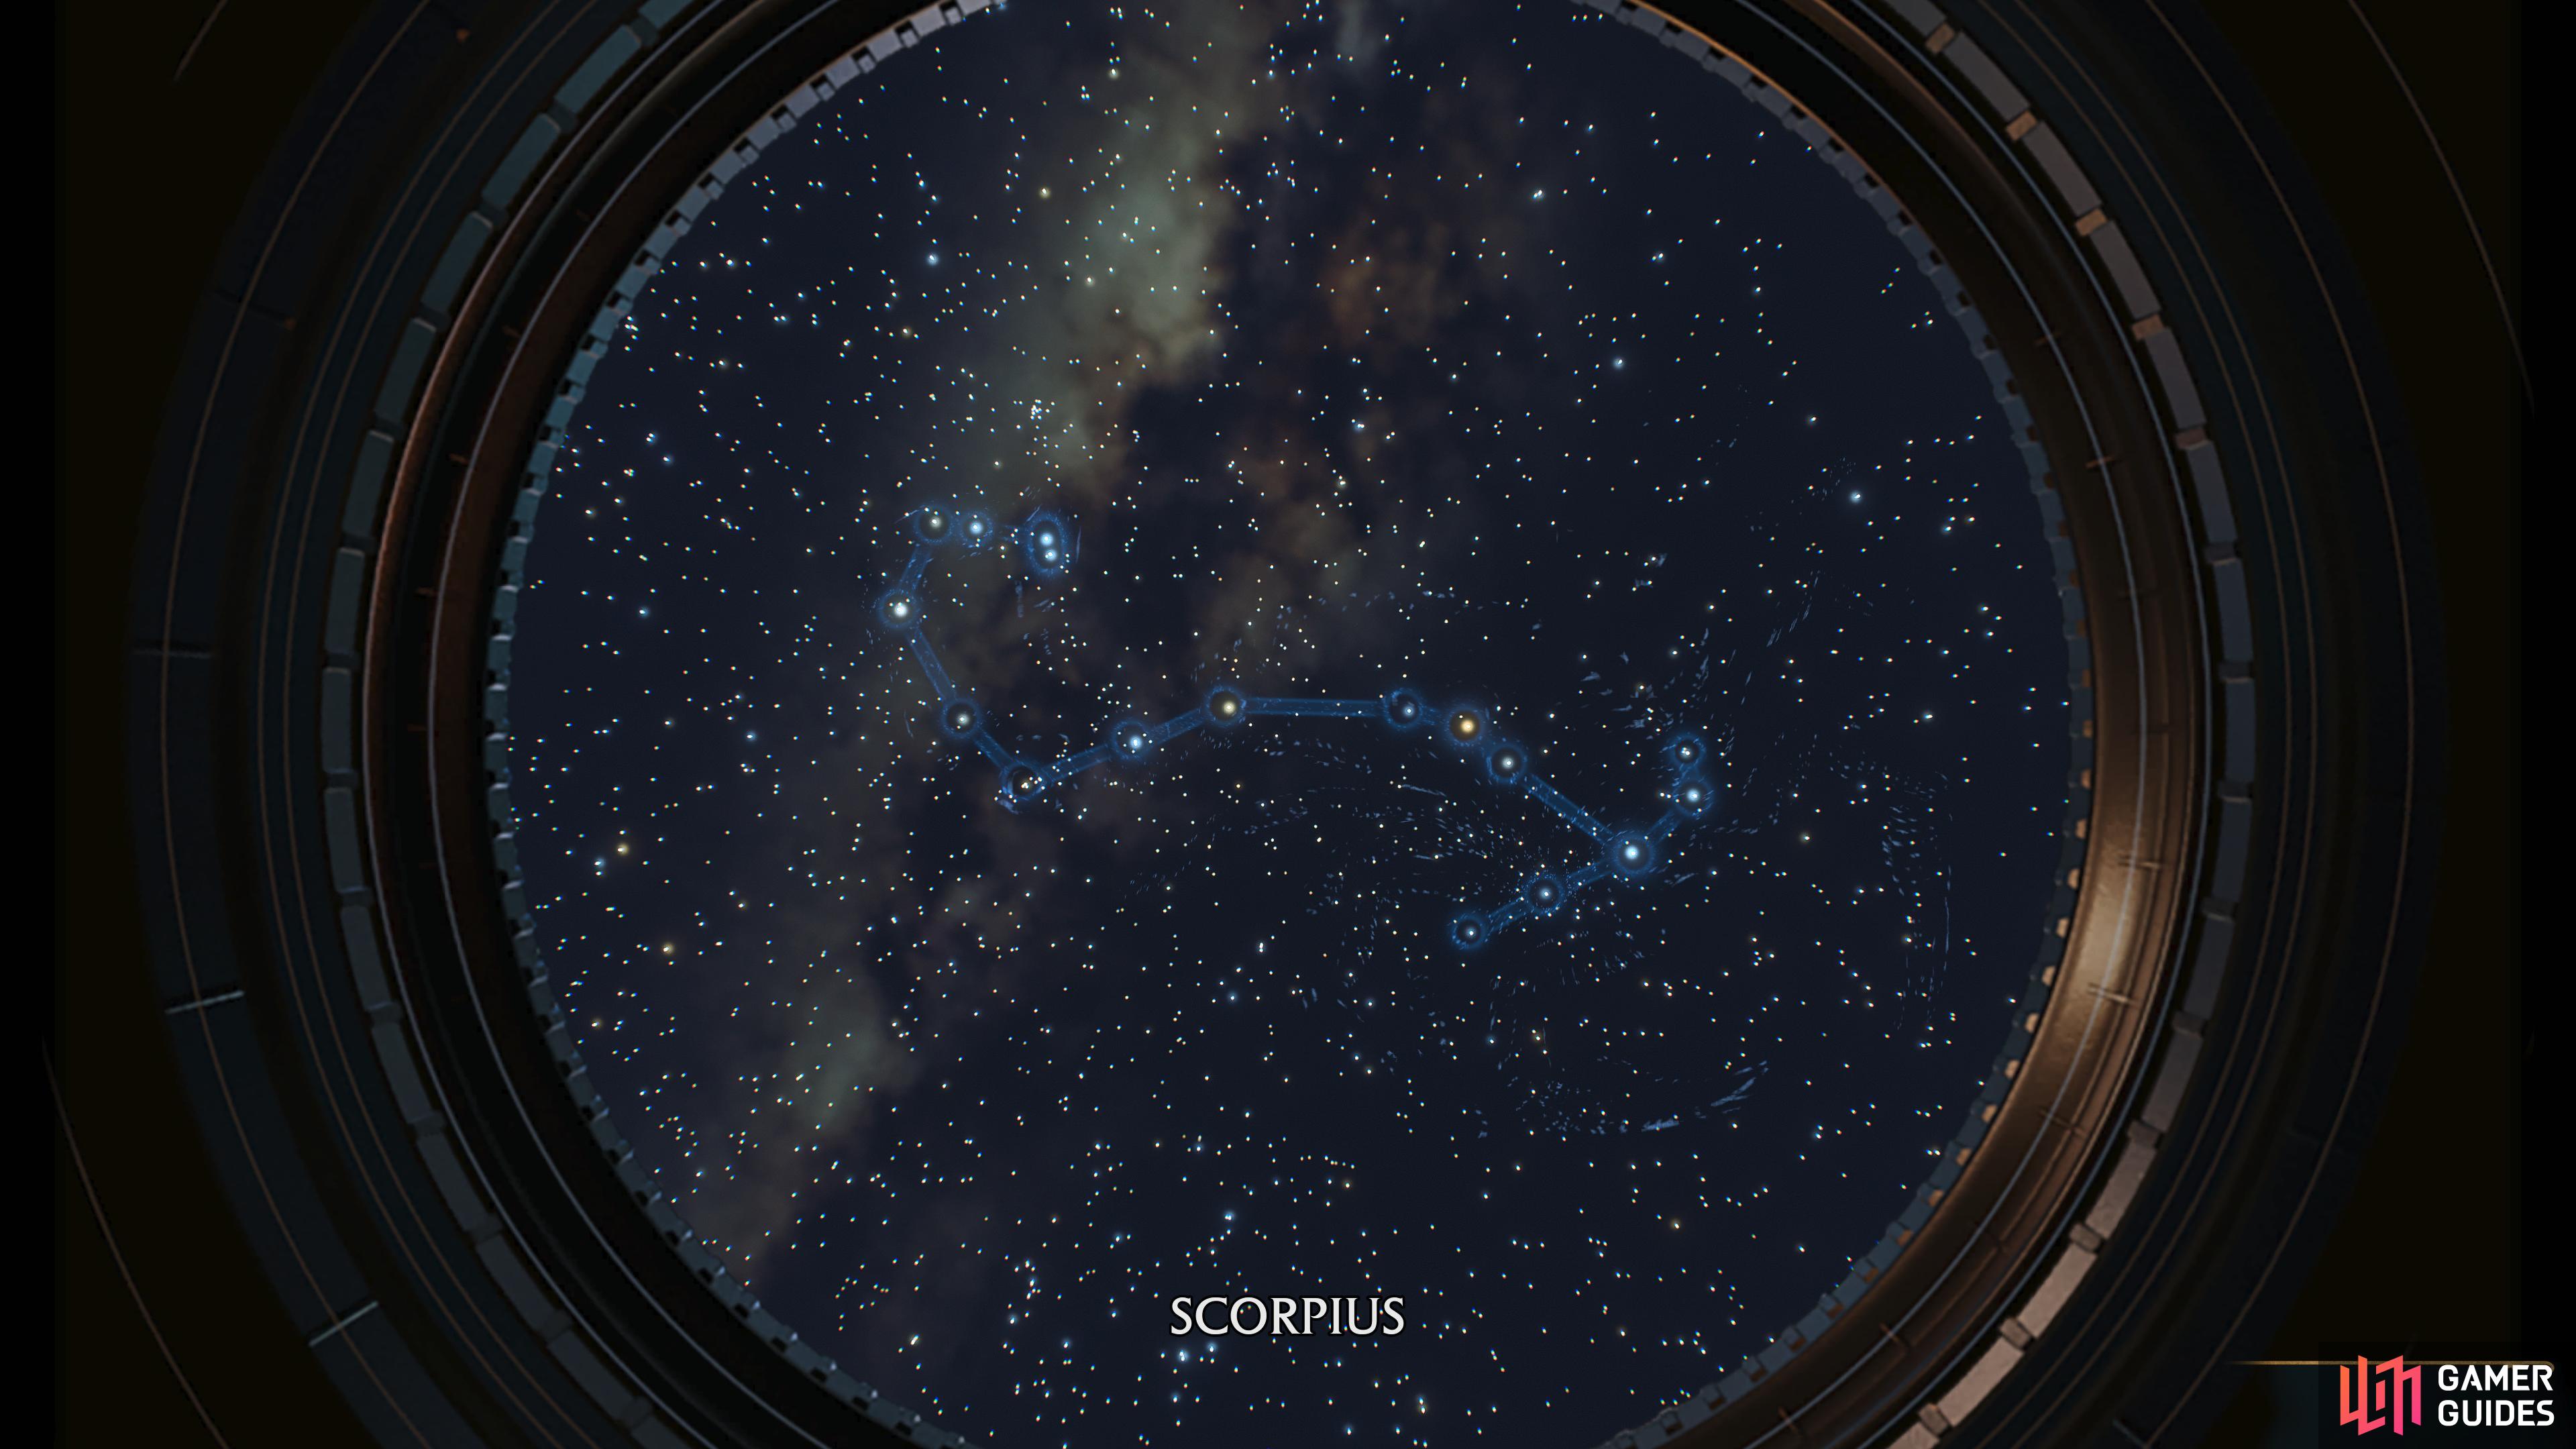 this is the sign for !Scorpius.